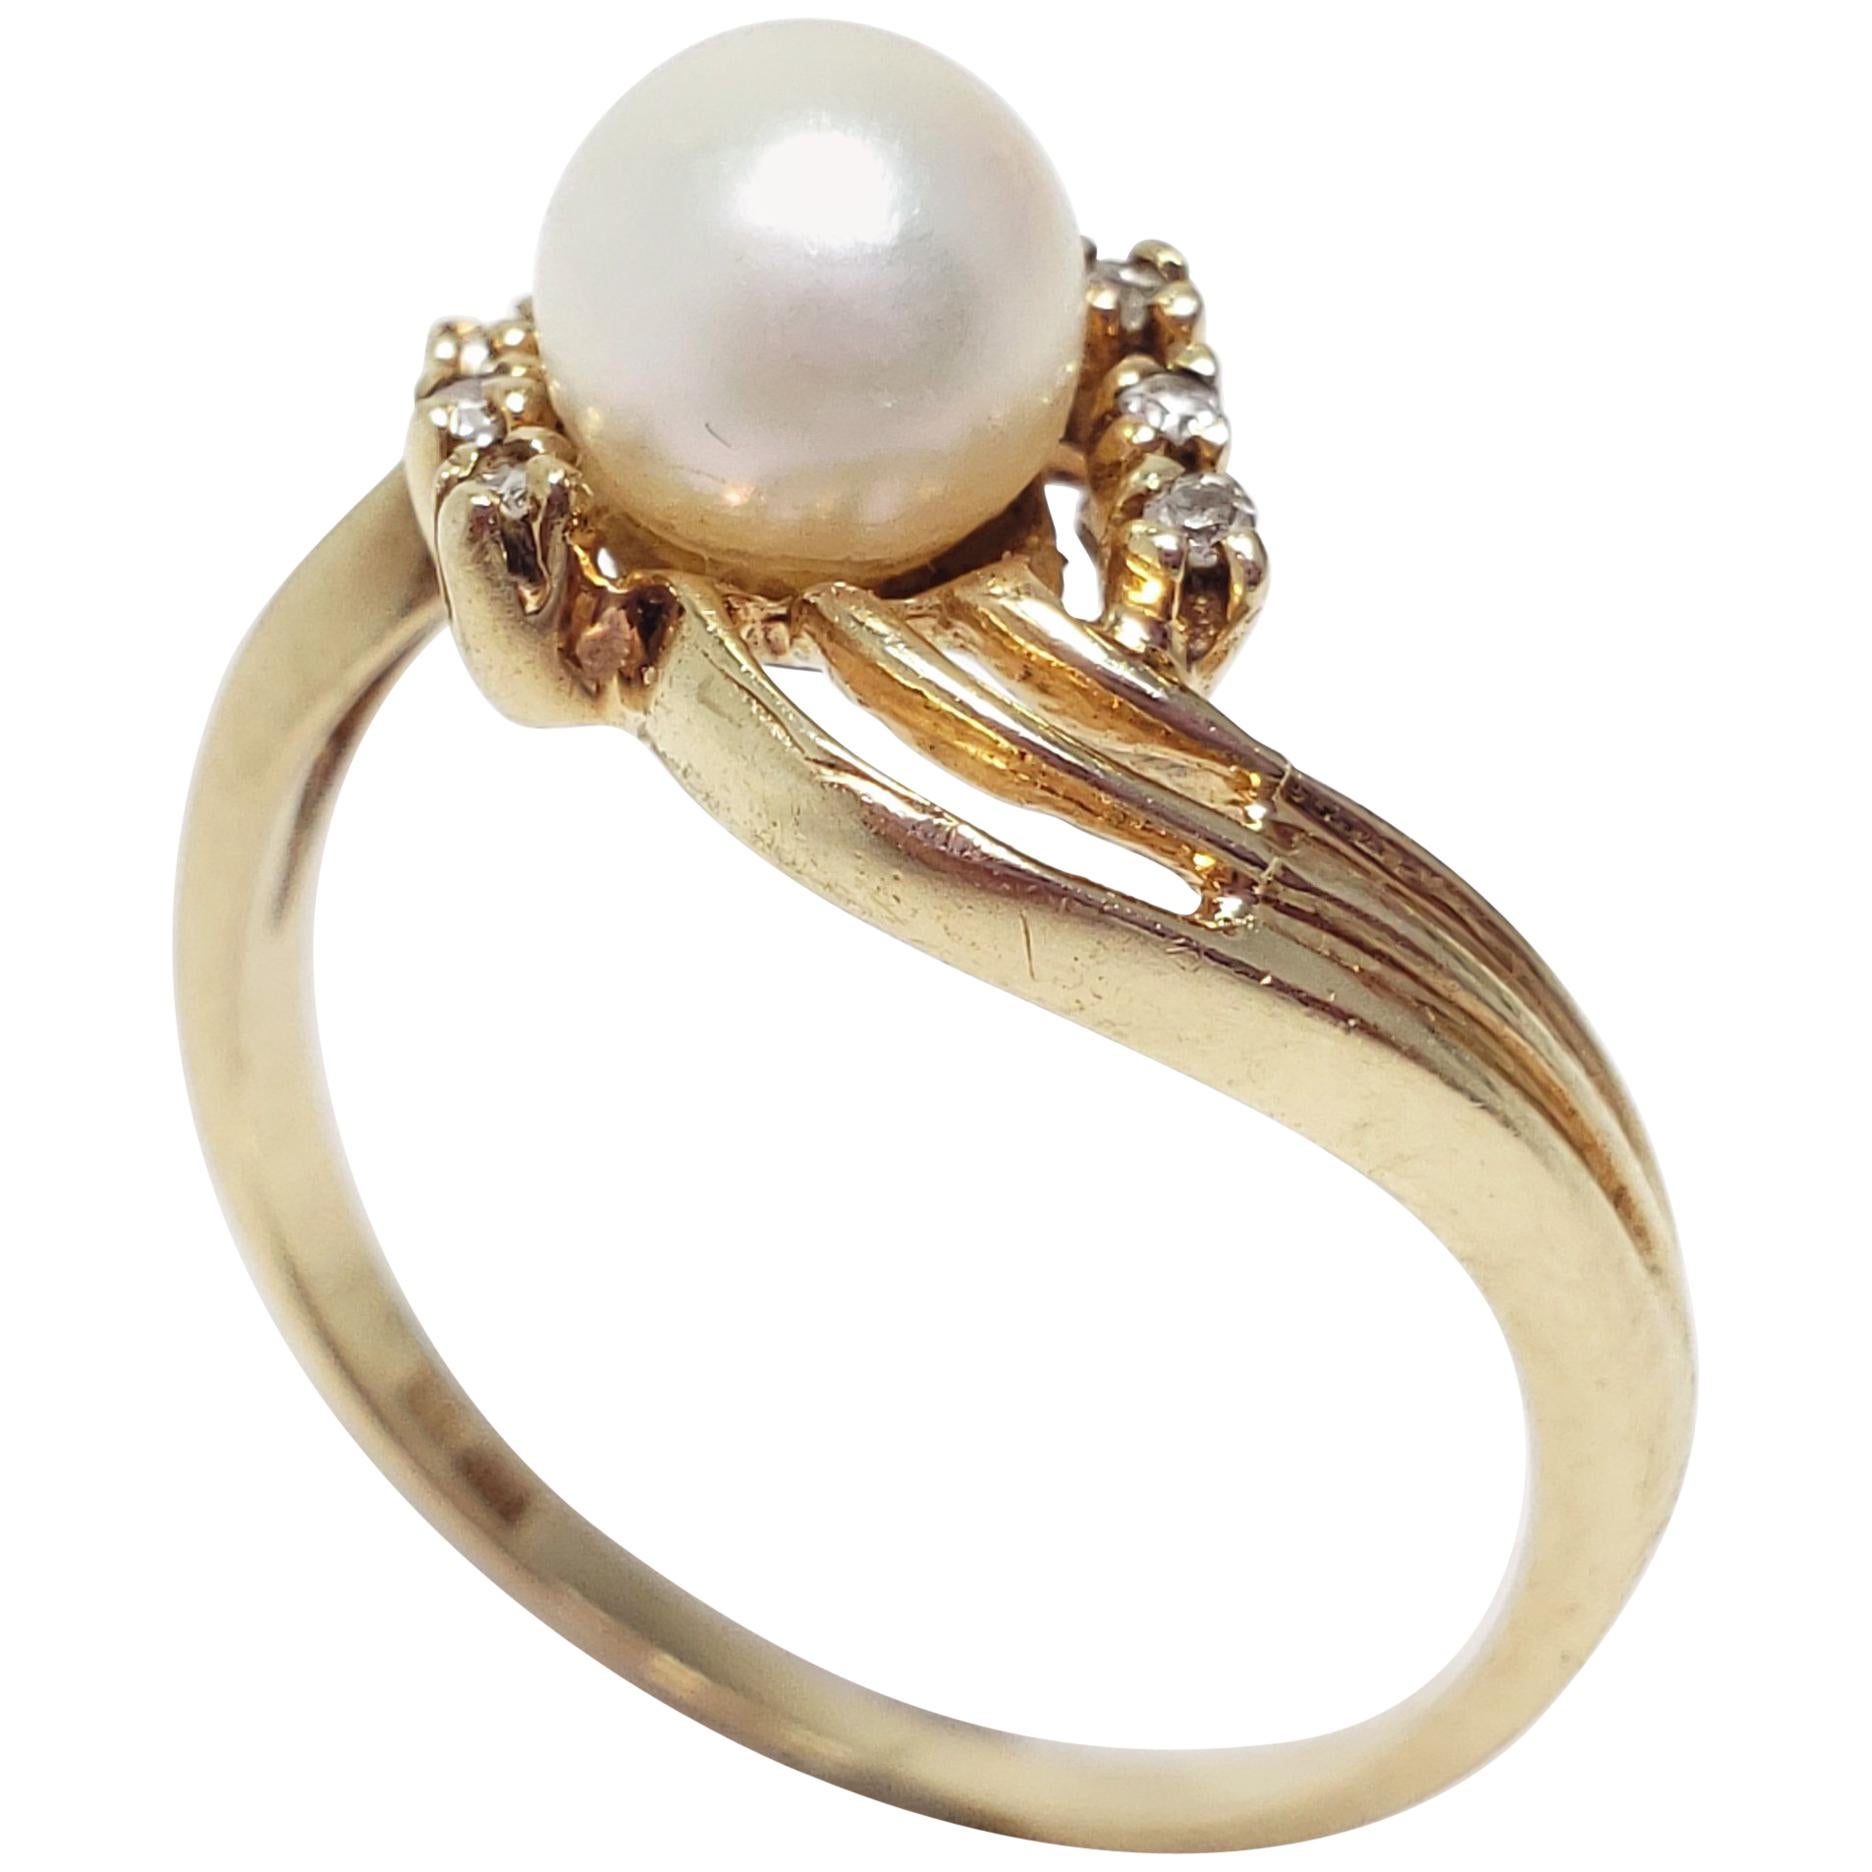 Vintage Pearl and Diamond 10K Gold Ring Band, Size US 7